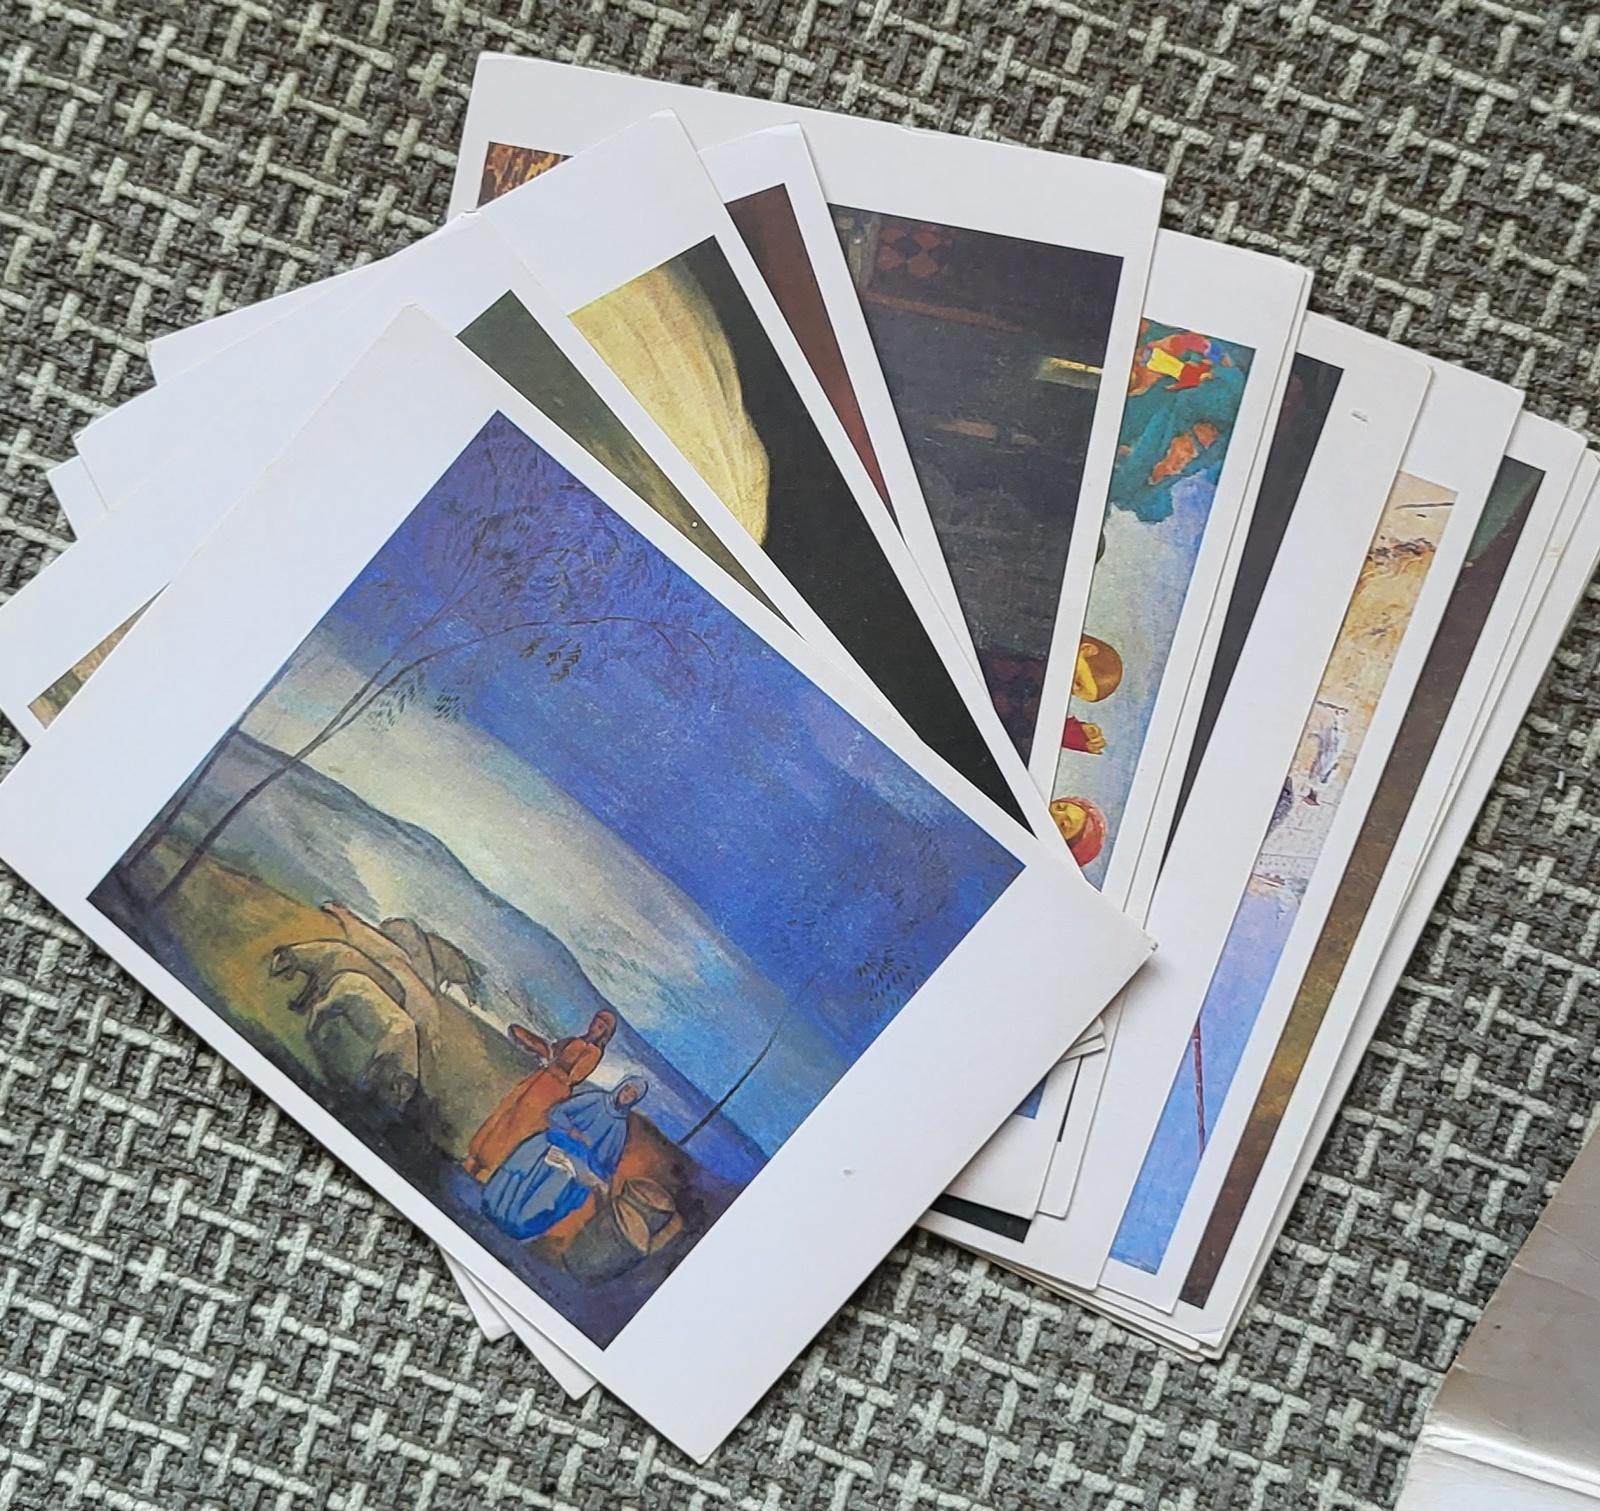 Step into the world of art with this extraordinary collection of vintage USSR postcards featuring masterpieces from the Tretiakov Gallery in Moscow. Dating back to circa 1981, these 14 postcards offer a glimpse into the prestigious art collection